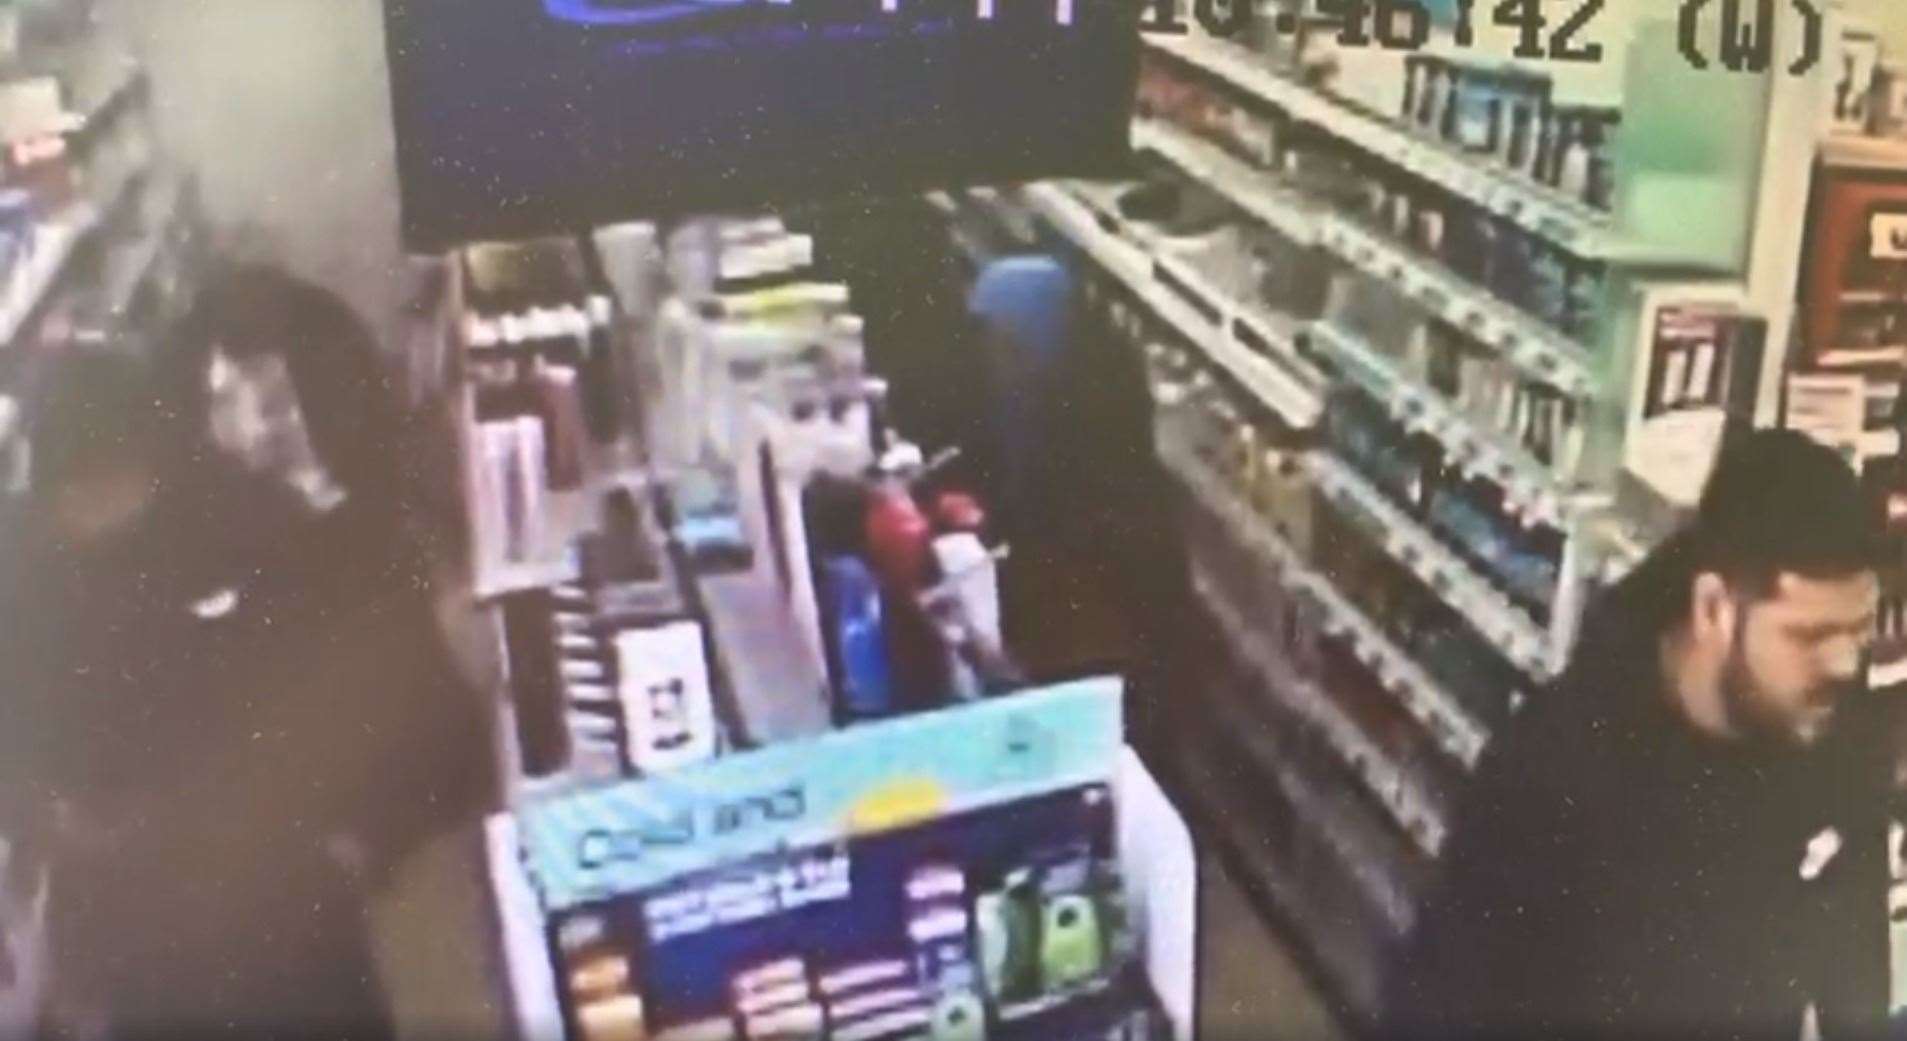 The three women and two men were caught on CCTV stealing nicotine replacement products from Well Lydd Pharmacy